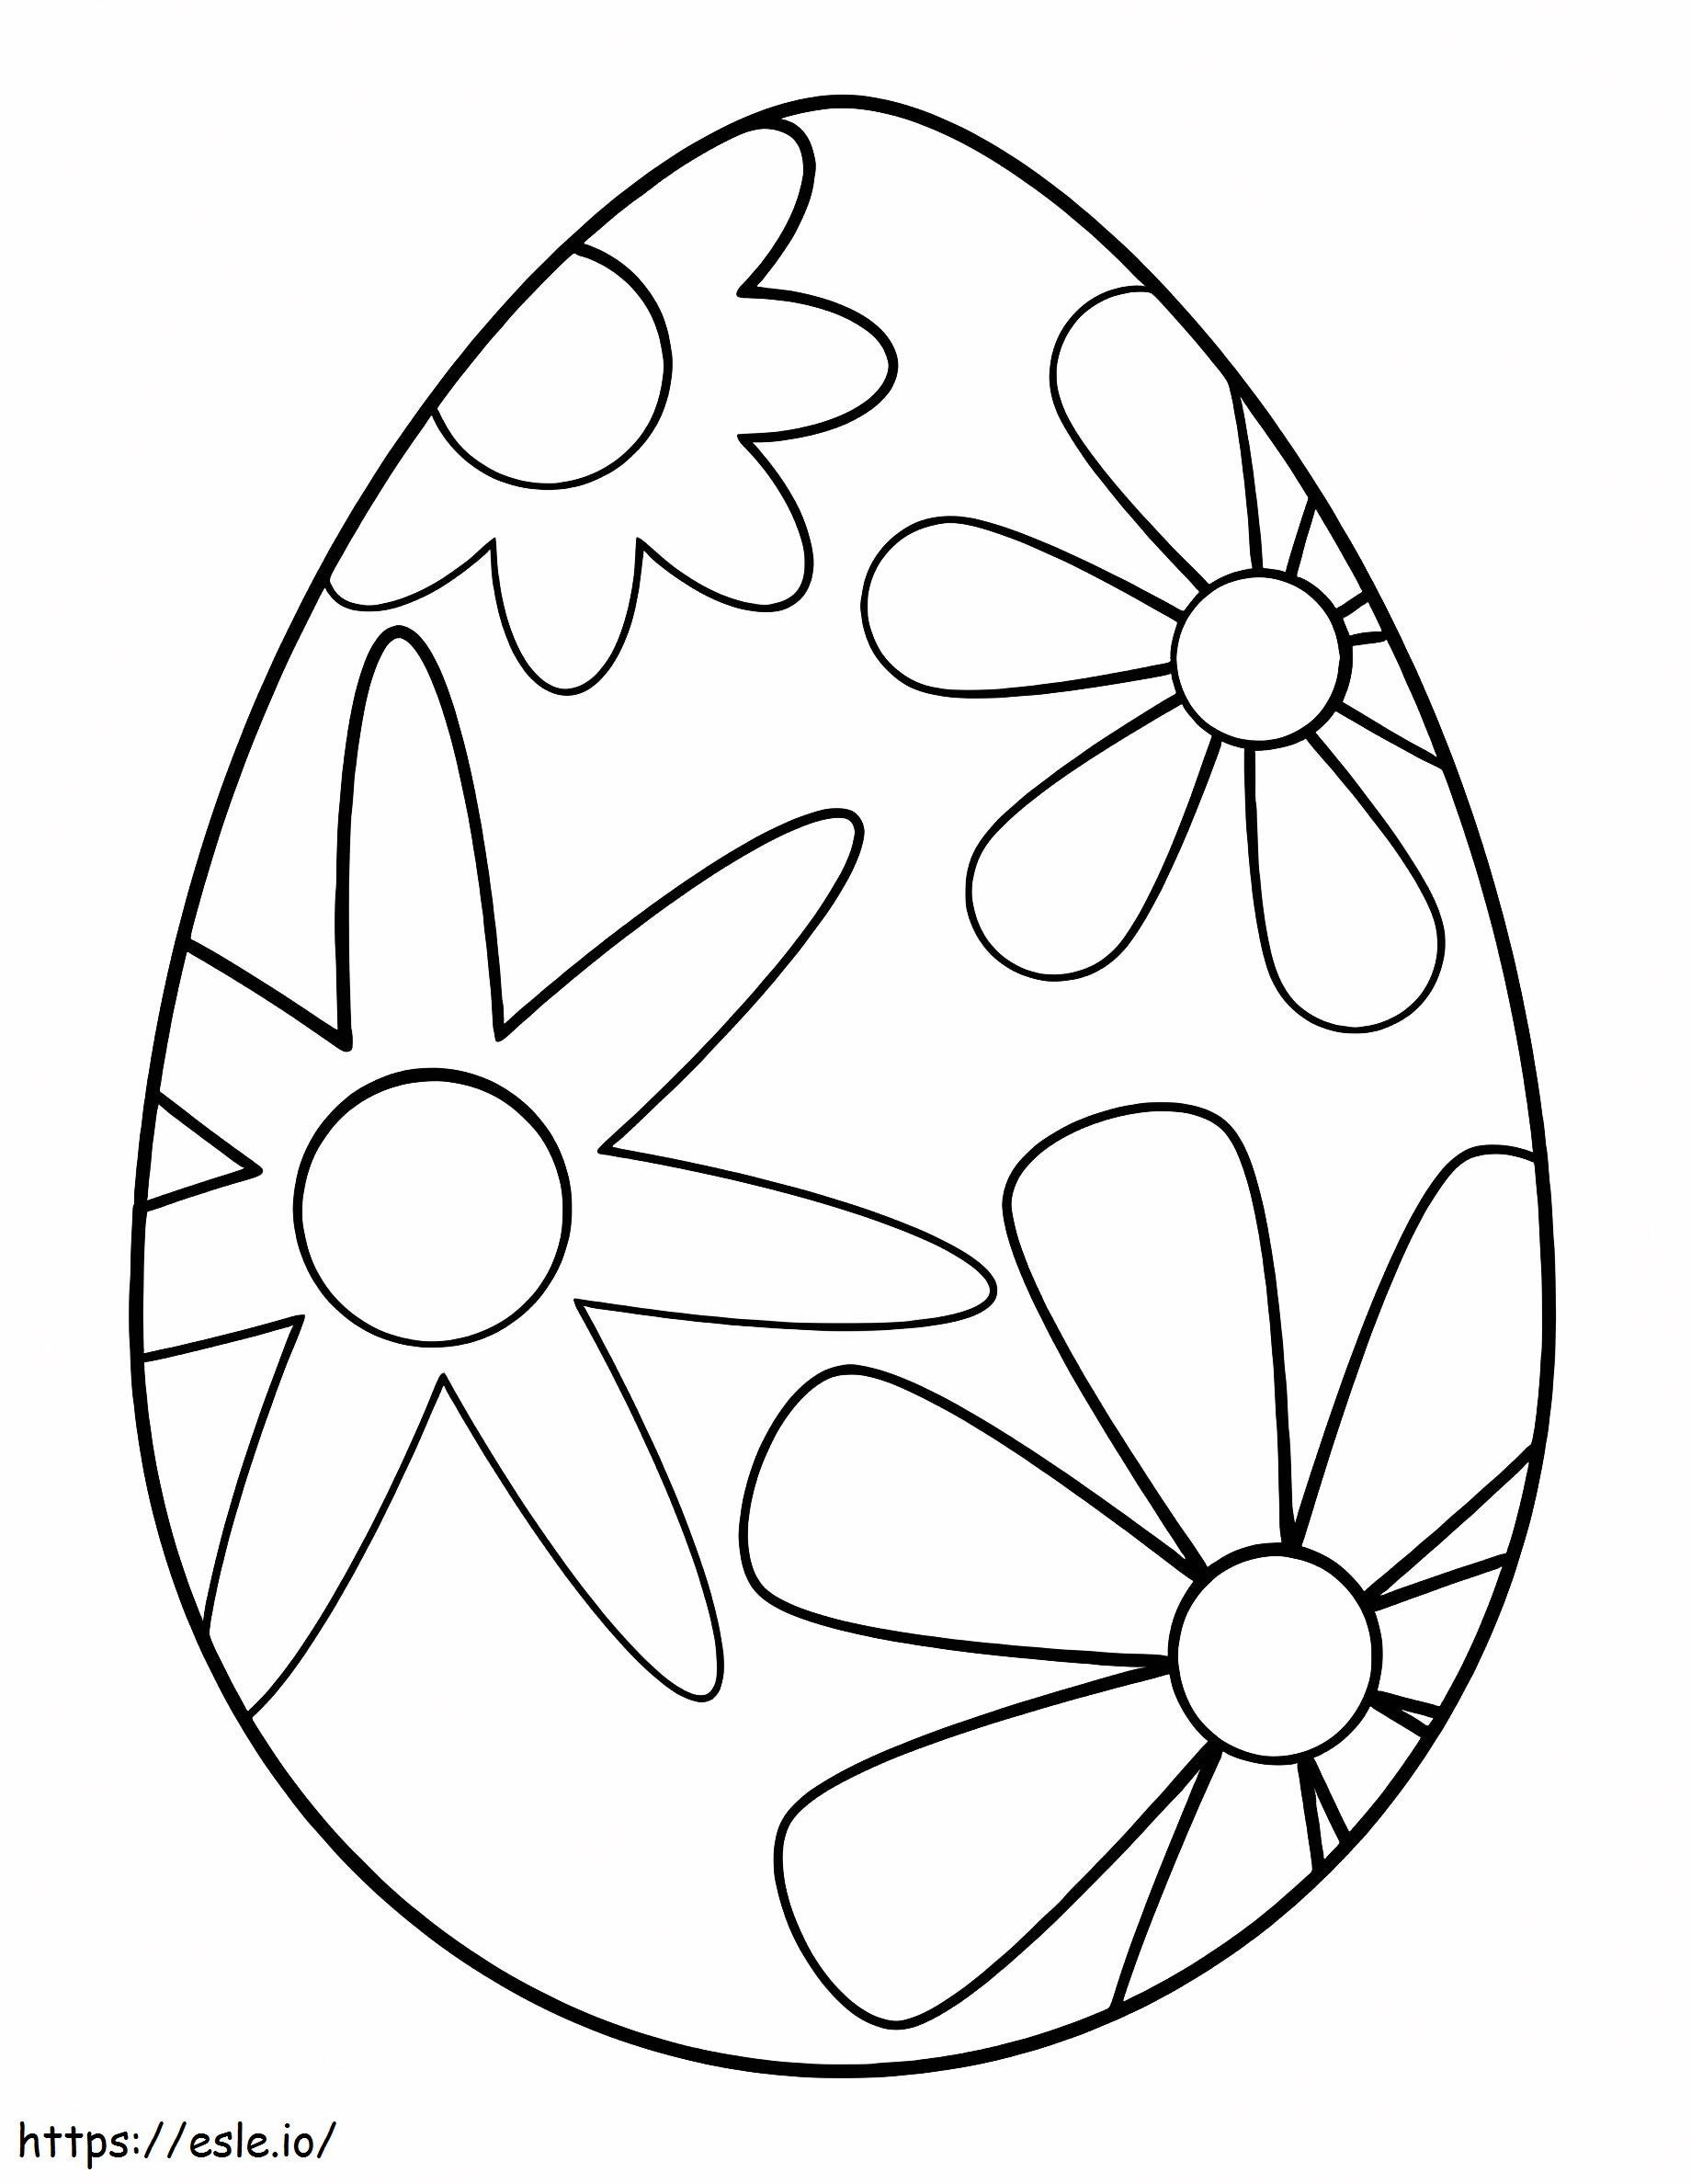 Four Flower Easter Egg coloring page